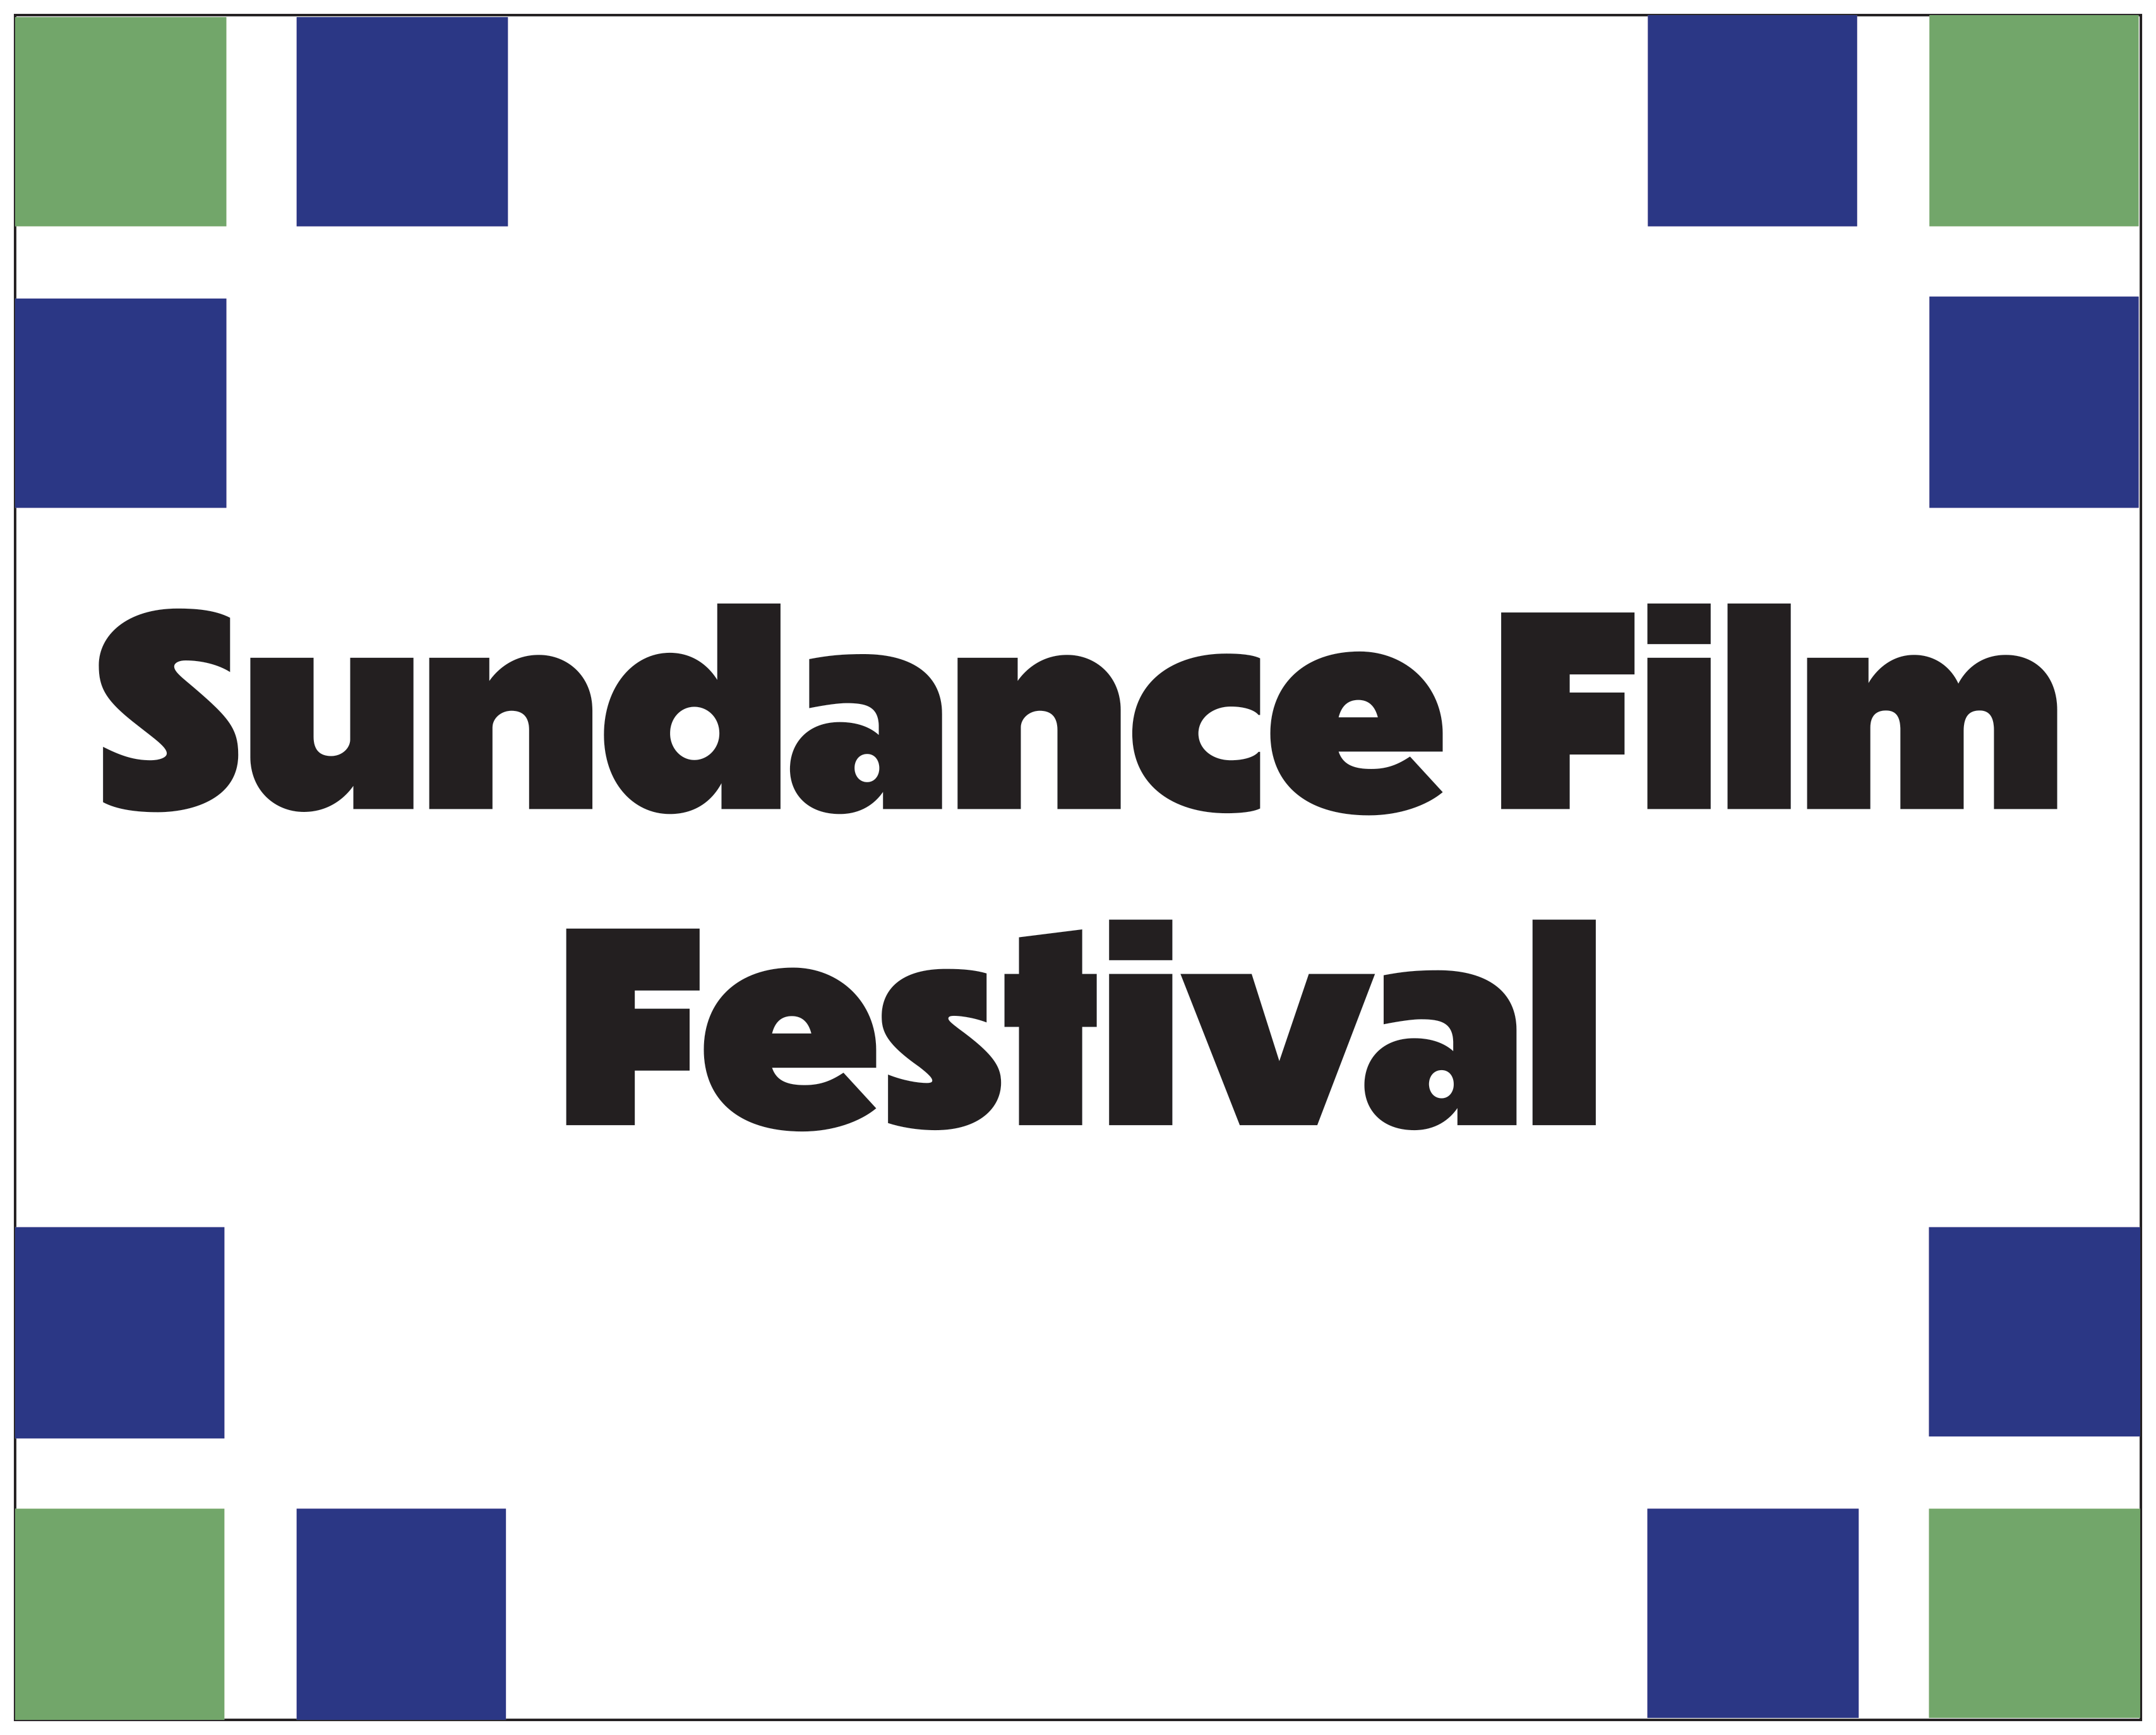 Is image saying that the name for the project and this one is sundance film festival